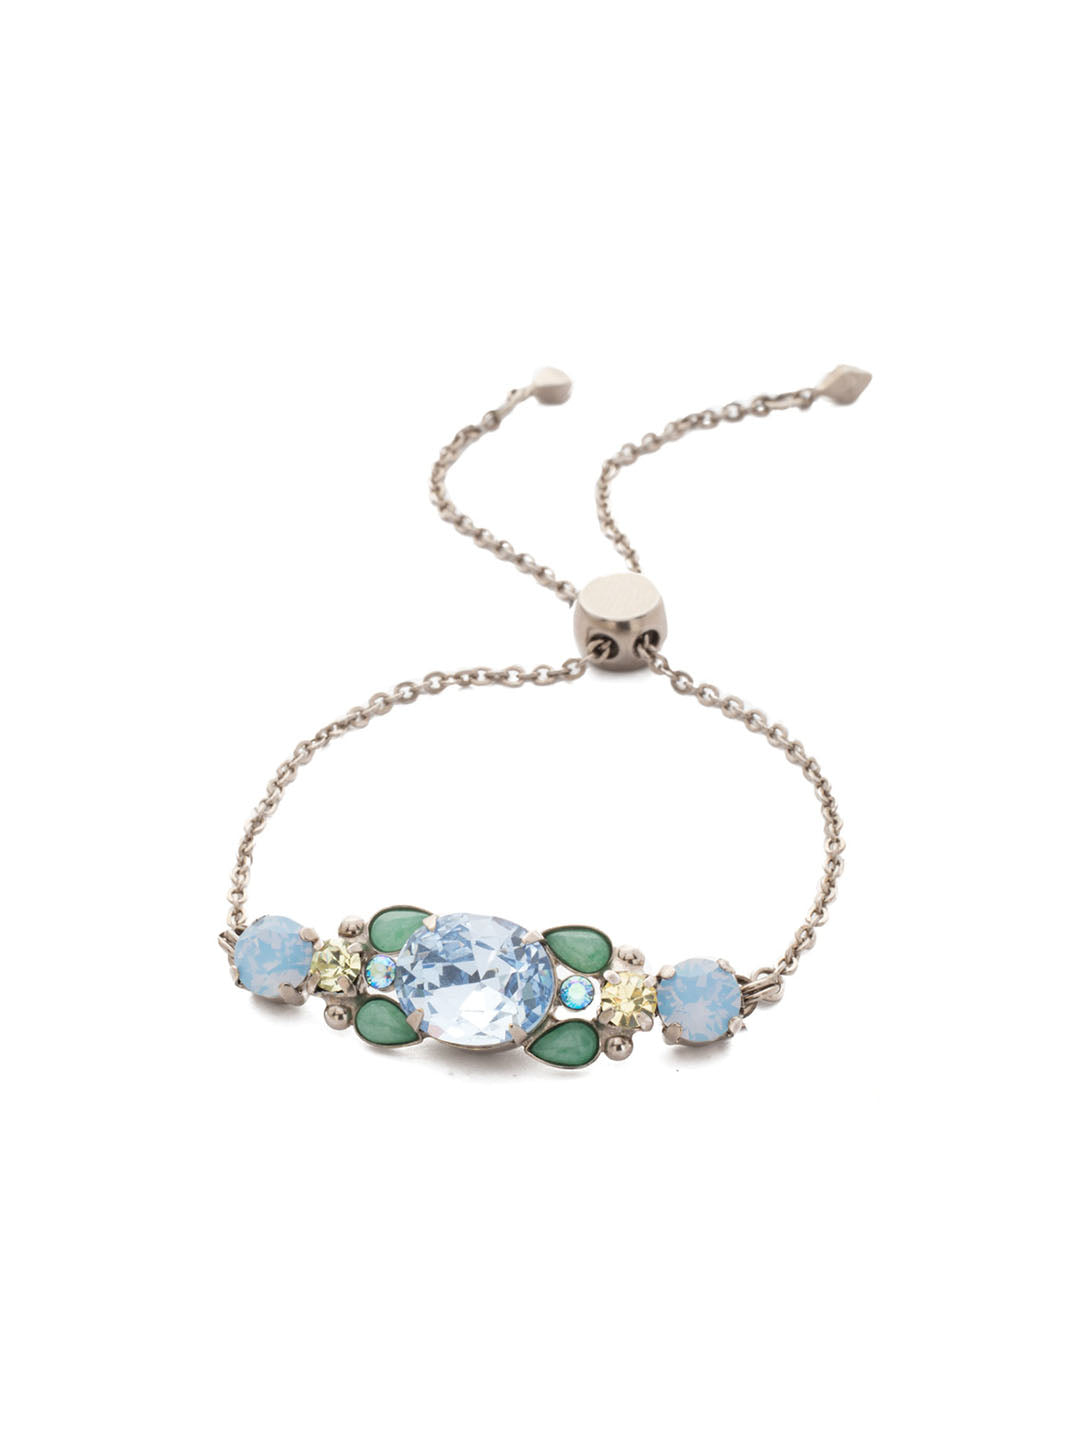 Annabella Slider Bracelet - BEA28ASPRP - This unique and charming classic bracelet features a central piece consisting of various gorgeous crystals, brought together by a delicate adjustable chain.